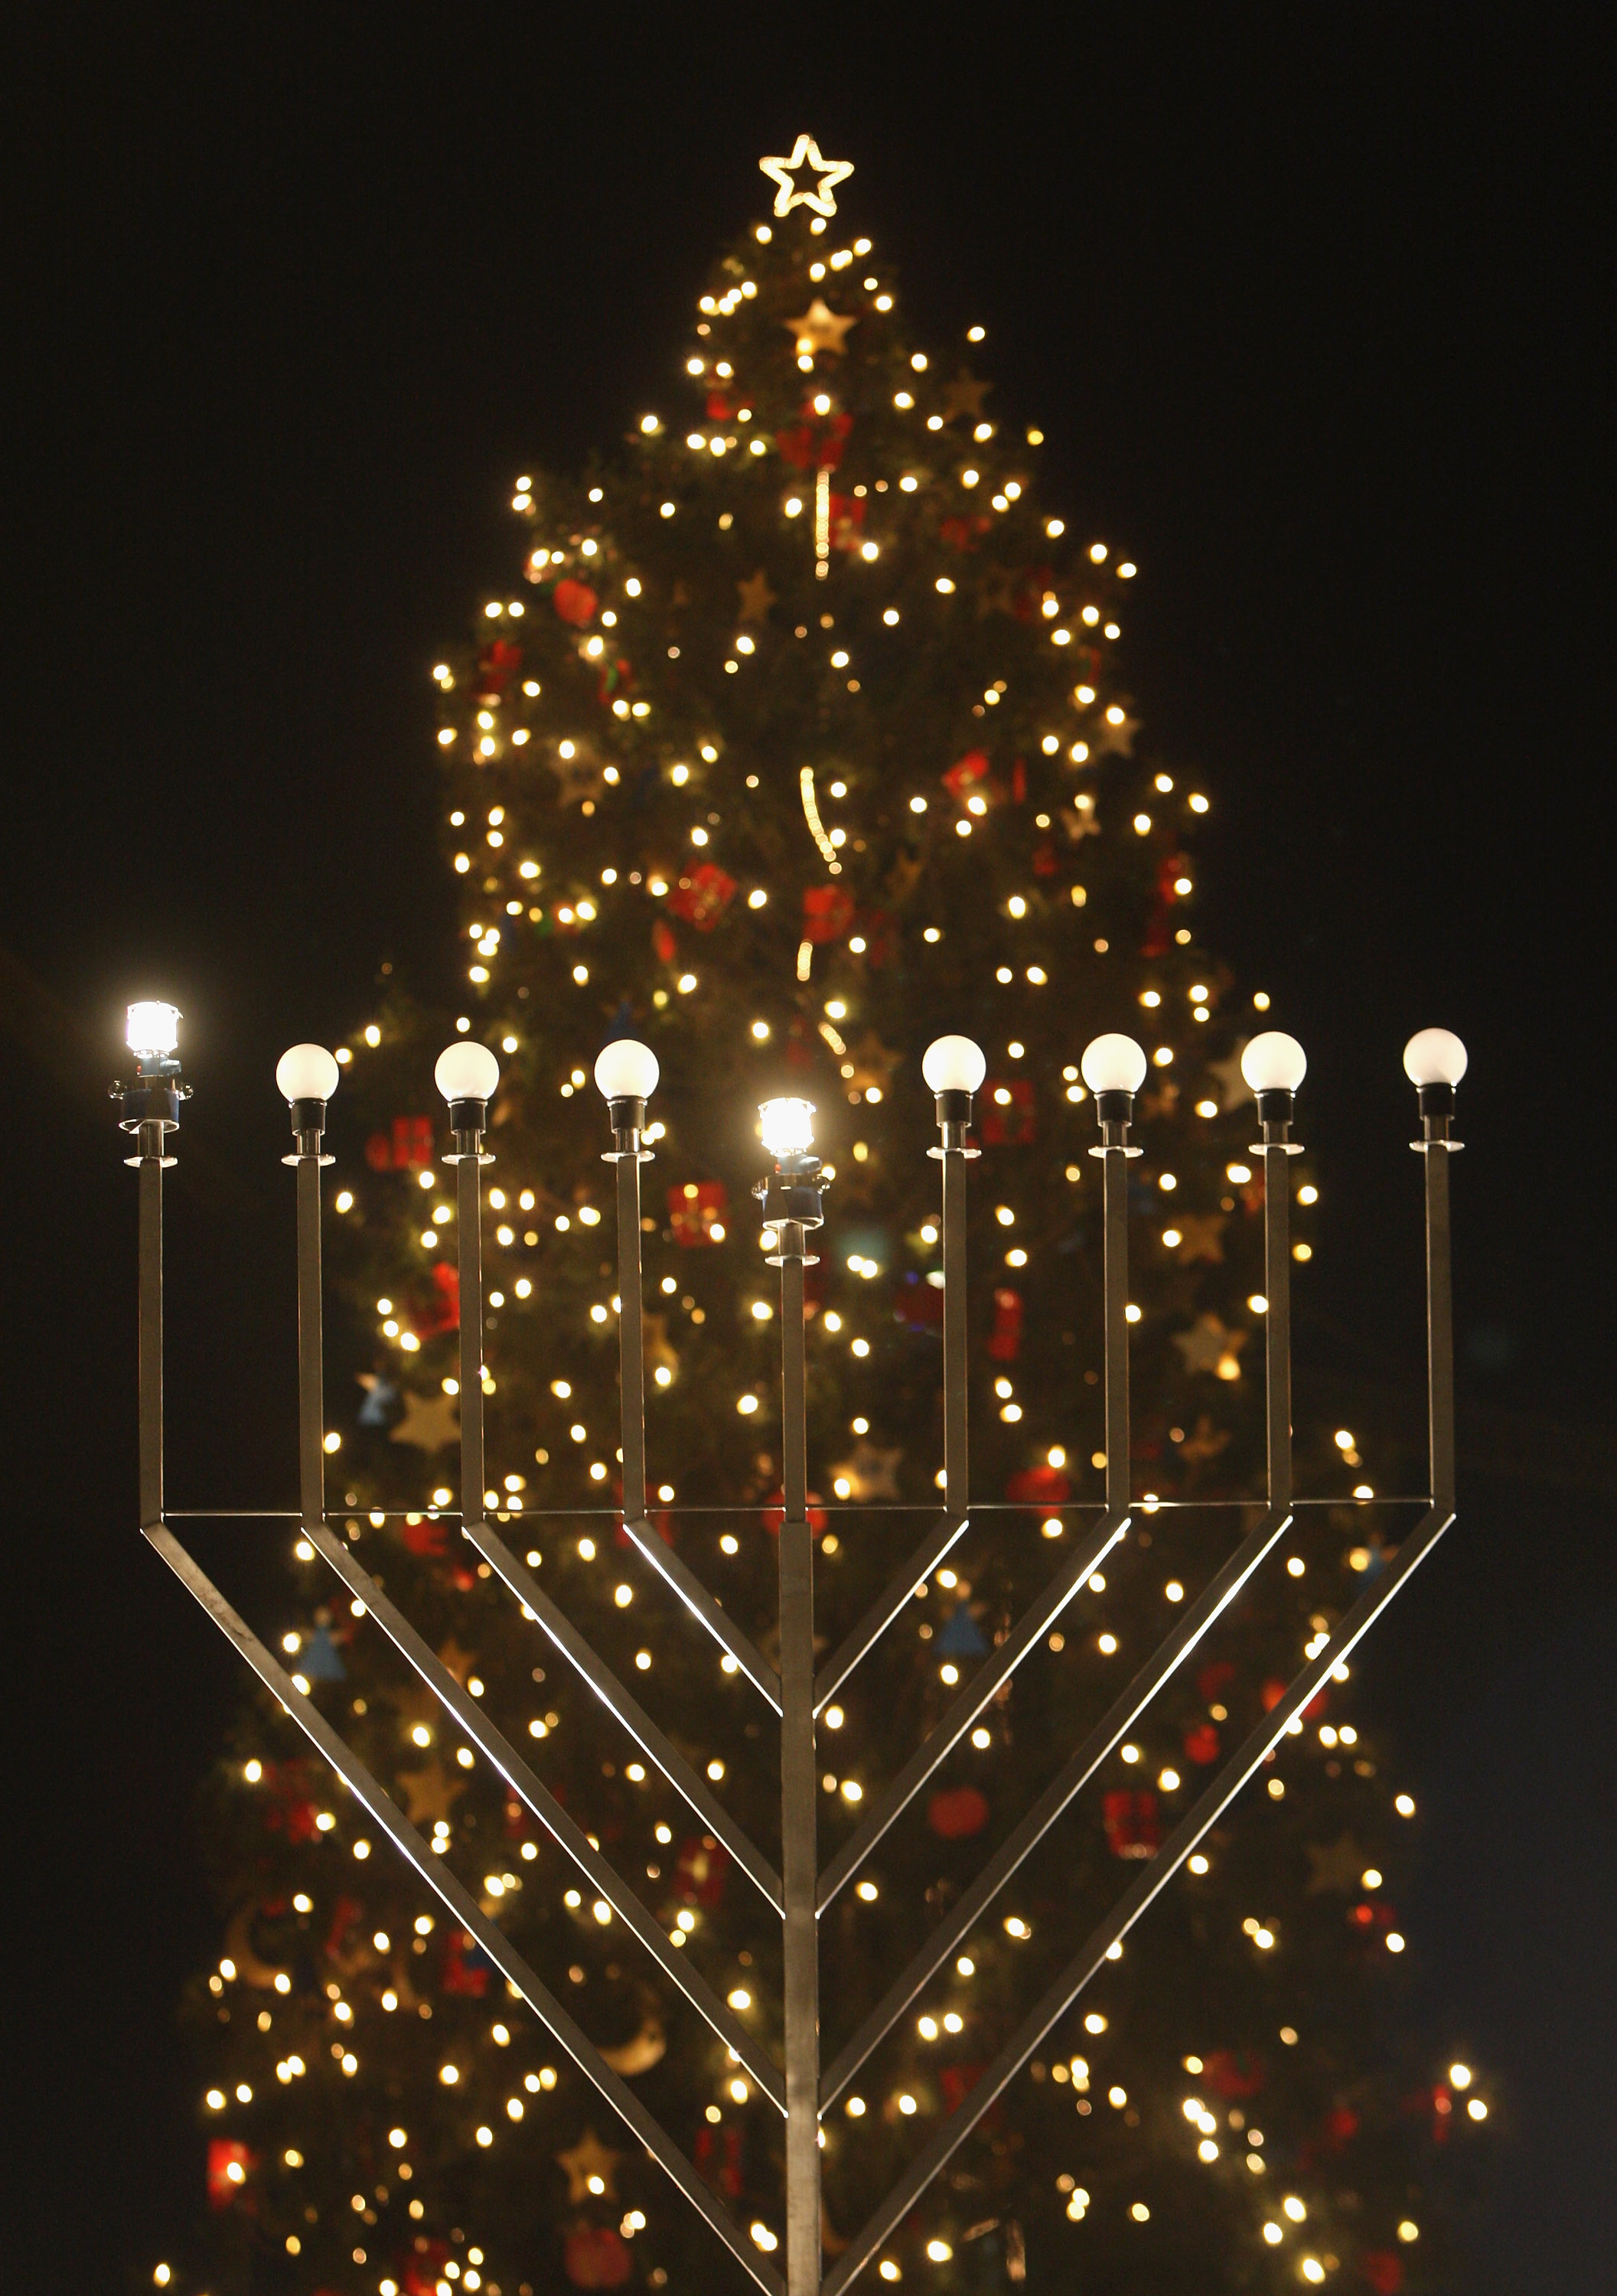 A giant, gas-lit menorah stands in front of a Christmas tree shortly after members of the local Jewish community lit the menorah on the night before the first day of Hannukah on Dec. 4, 2007 in Berlin, Germany. (Sean Gallup—Getty Images)